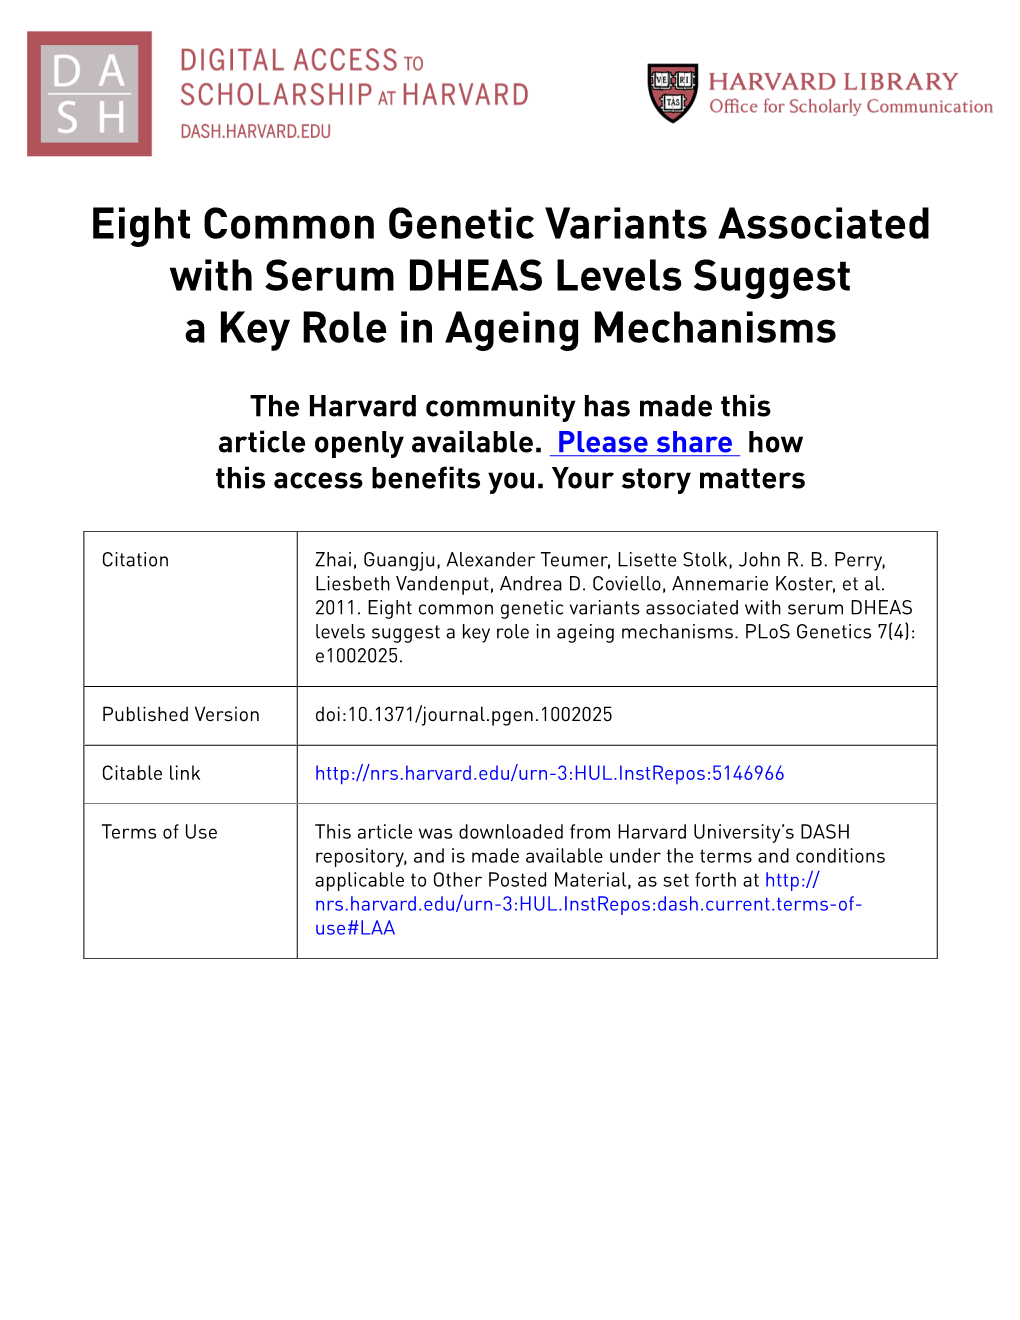 Eight Common Genetic Variants Associated with Serum DHEAS Levels Suggest a Key Role in Ageing Mechanisms